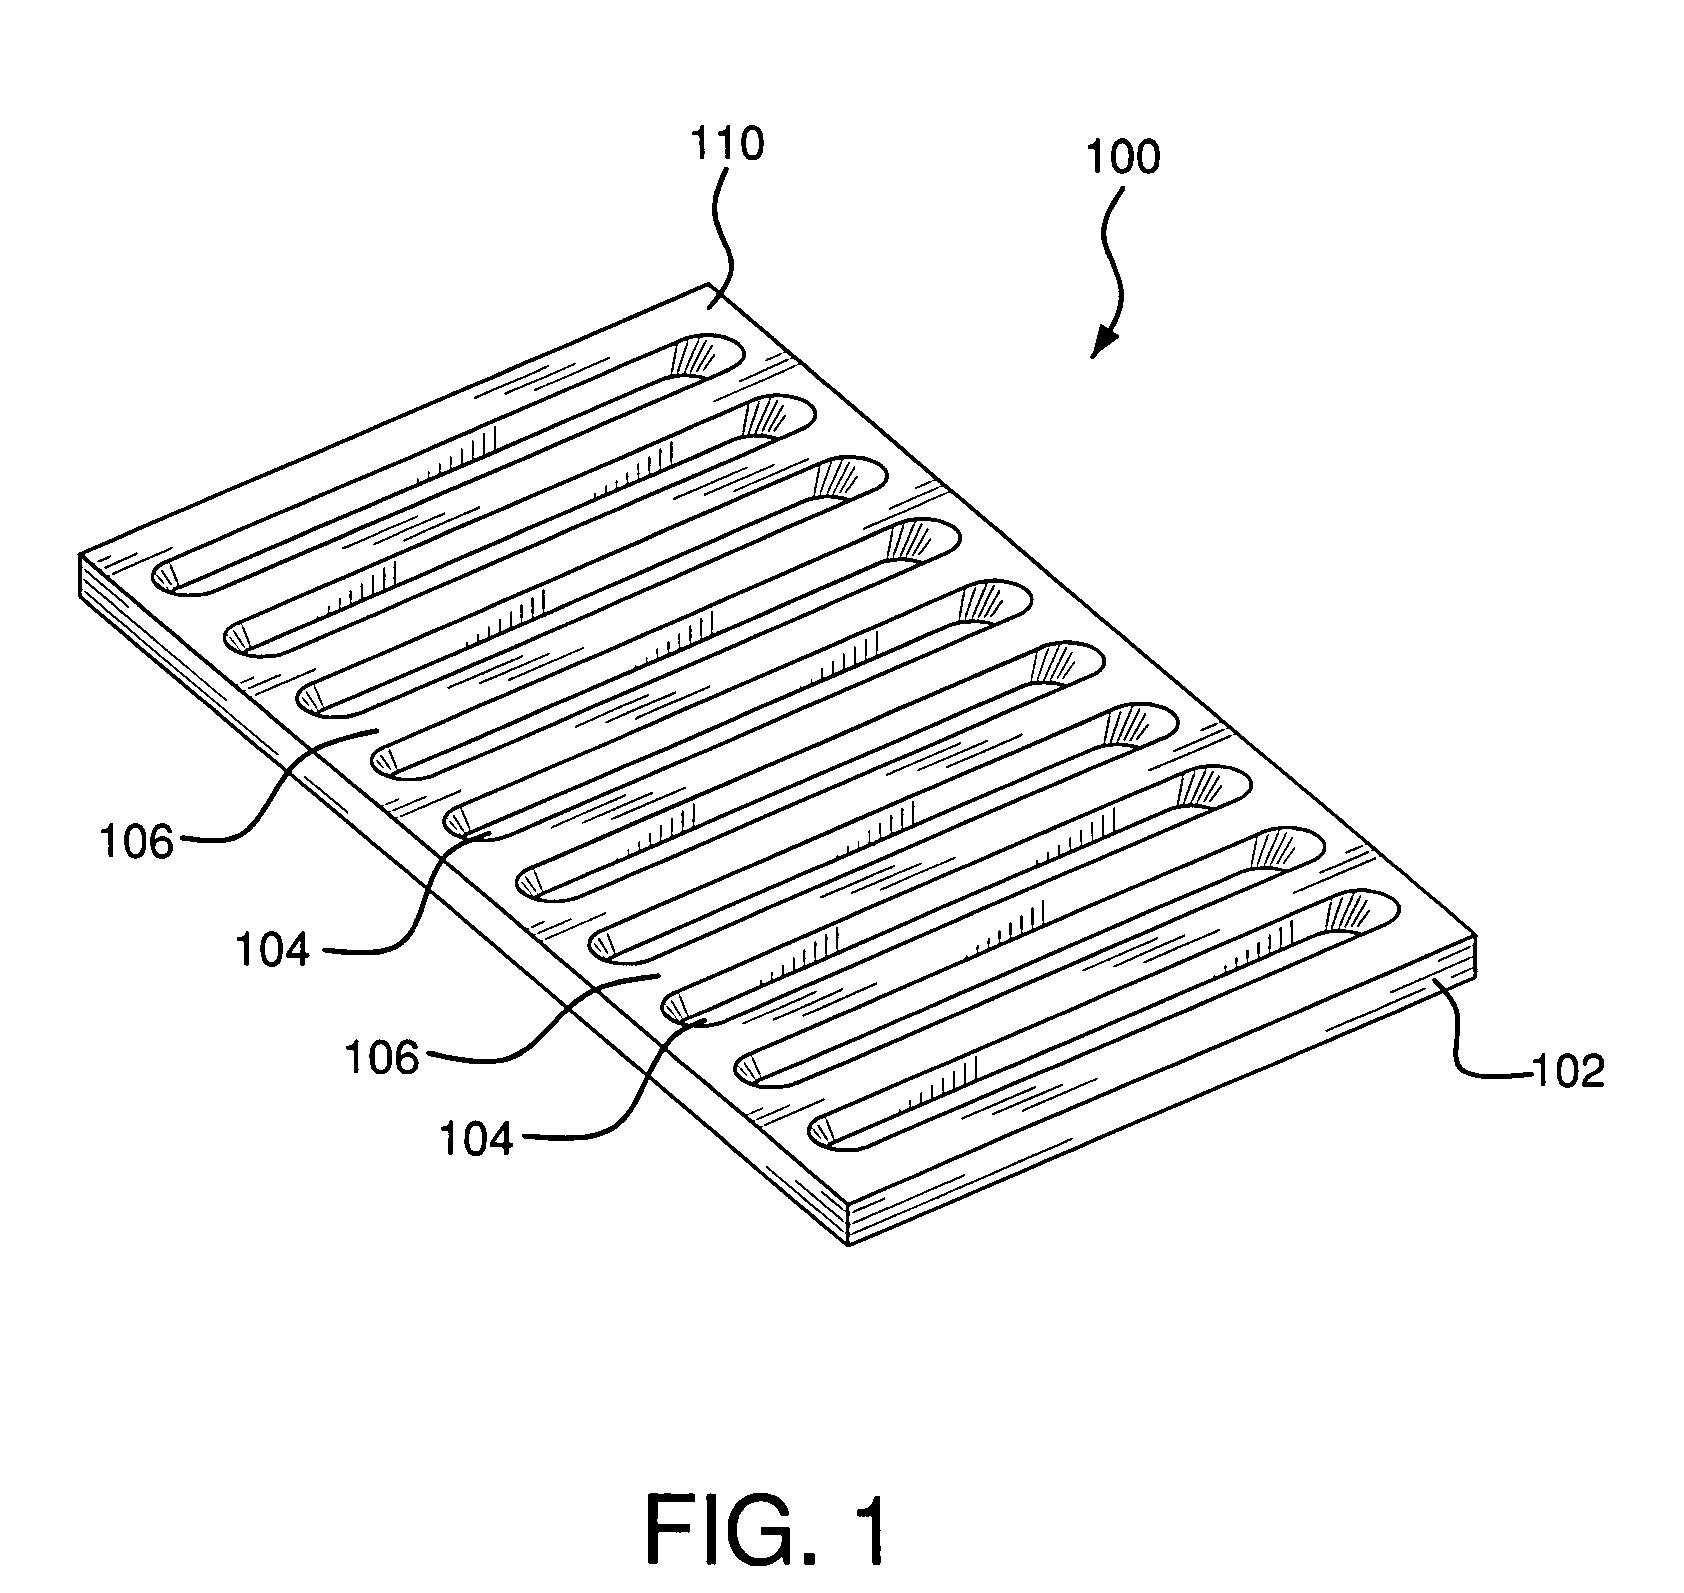 Growth stimulating wound dressing with improved contact surfaces